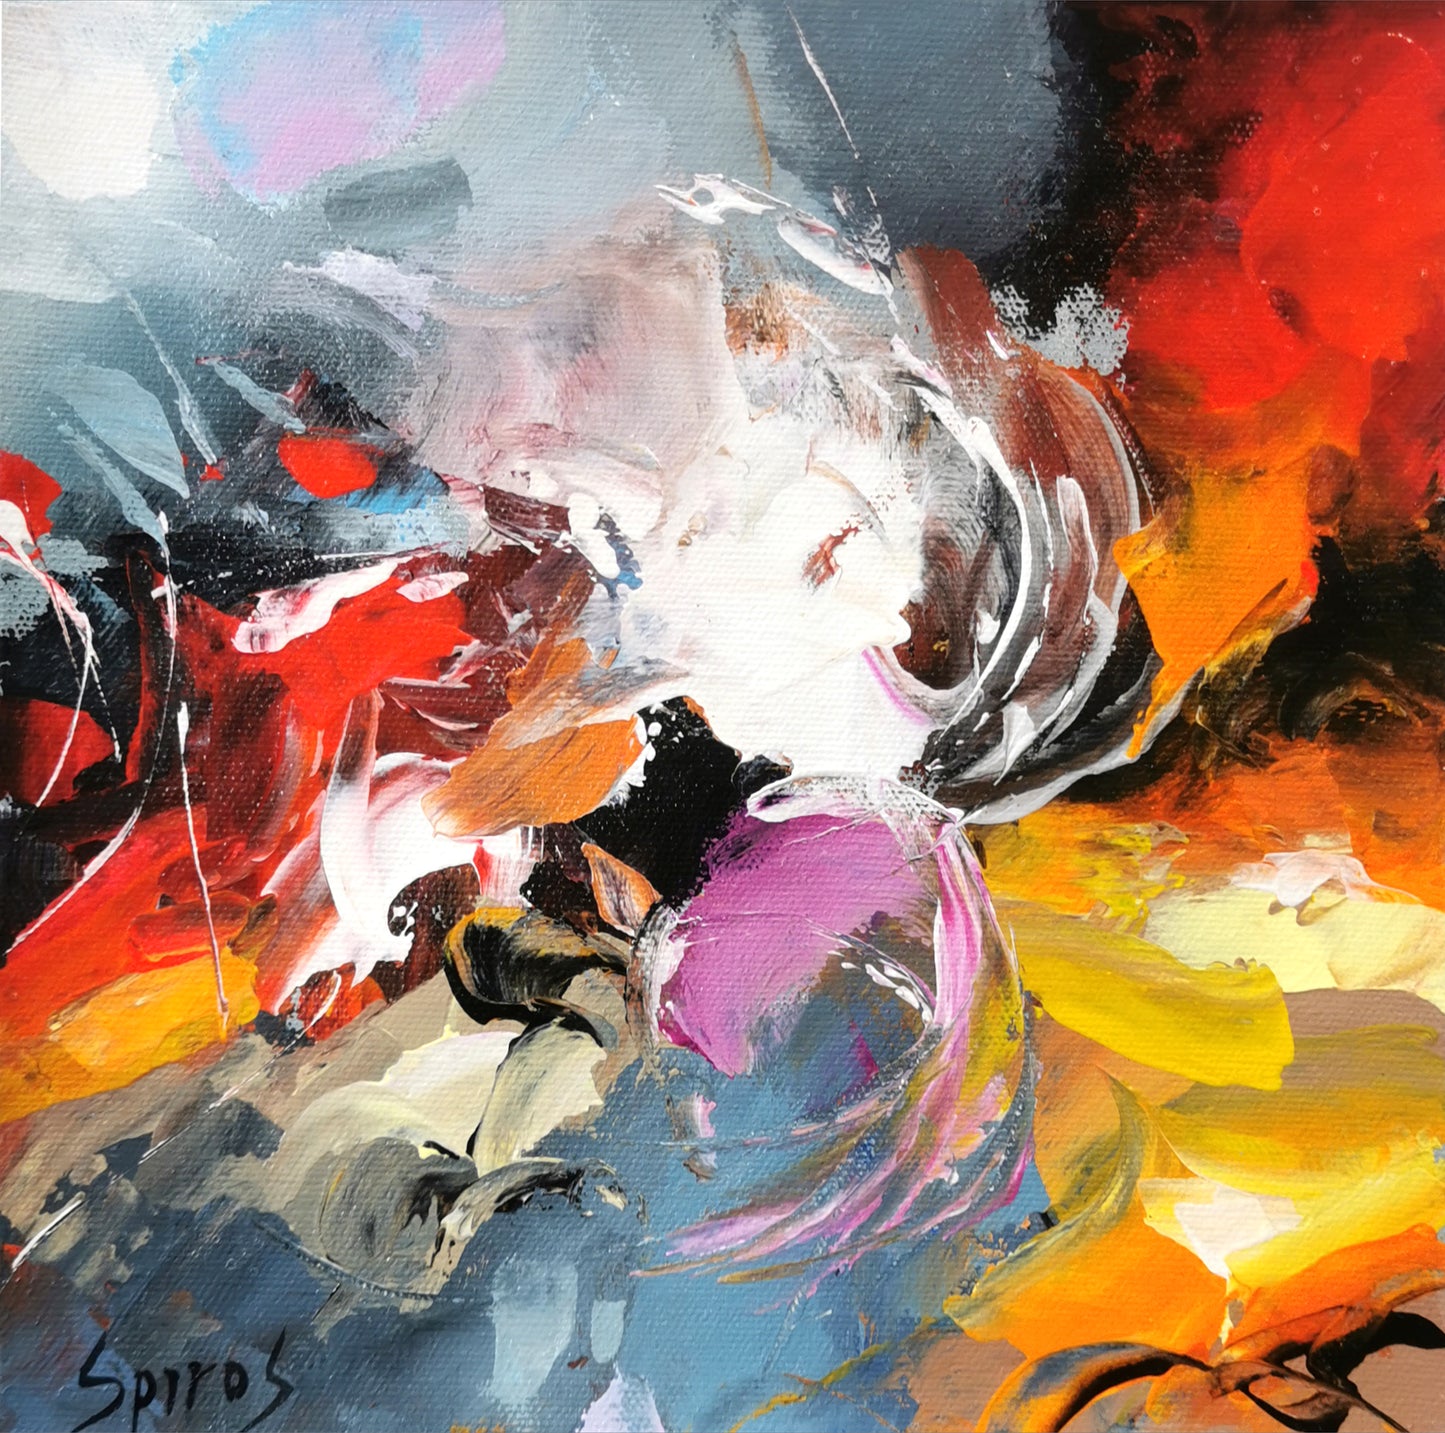 Imagine a painting where abstract flowers bloom with an explosion of black, yellow, and orange hues. The background is a vibrant canvas, splashed with varying shades of black that create depth and mystery. Amidst this dark backdrop, large swathes of yellow and orange burst forth, resembling petals in a wild, unrestrained dance.